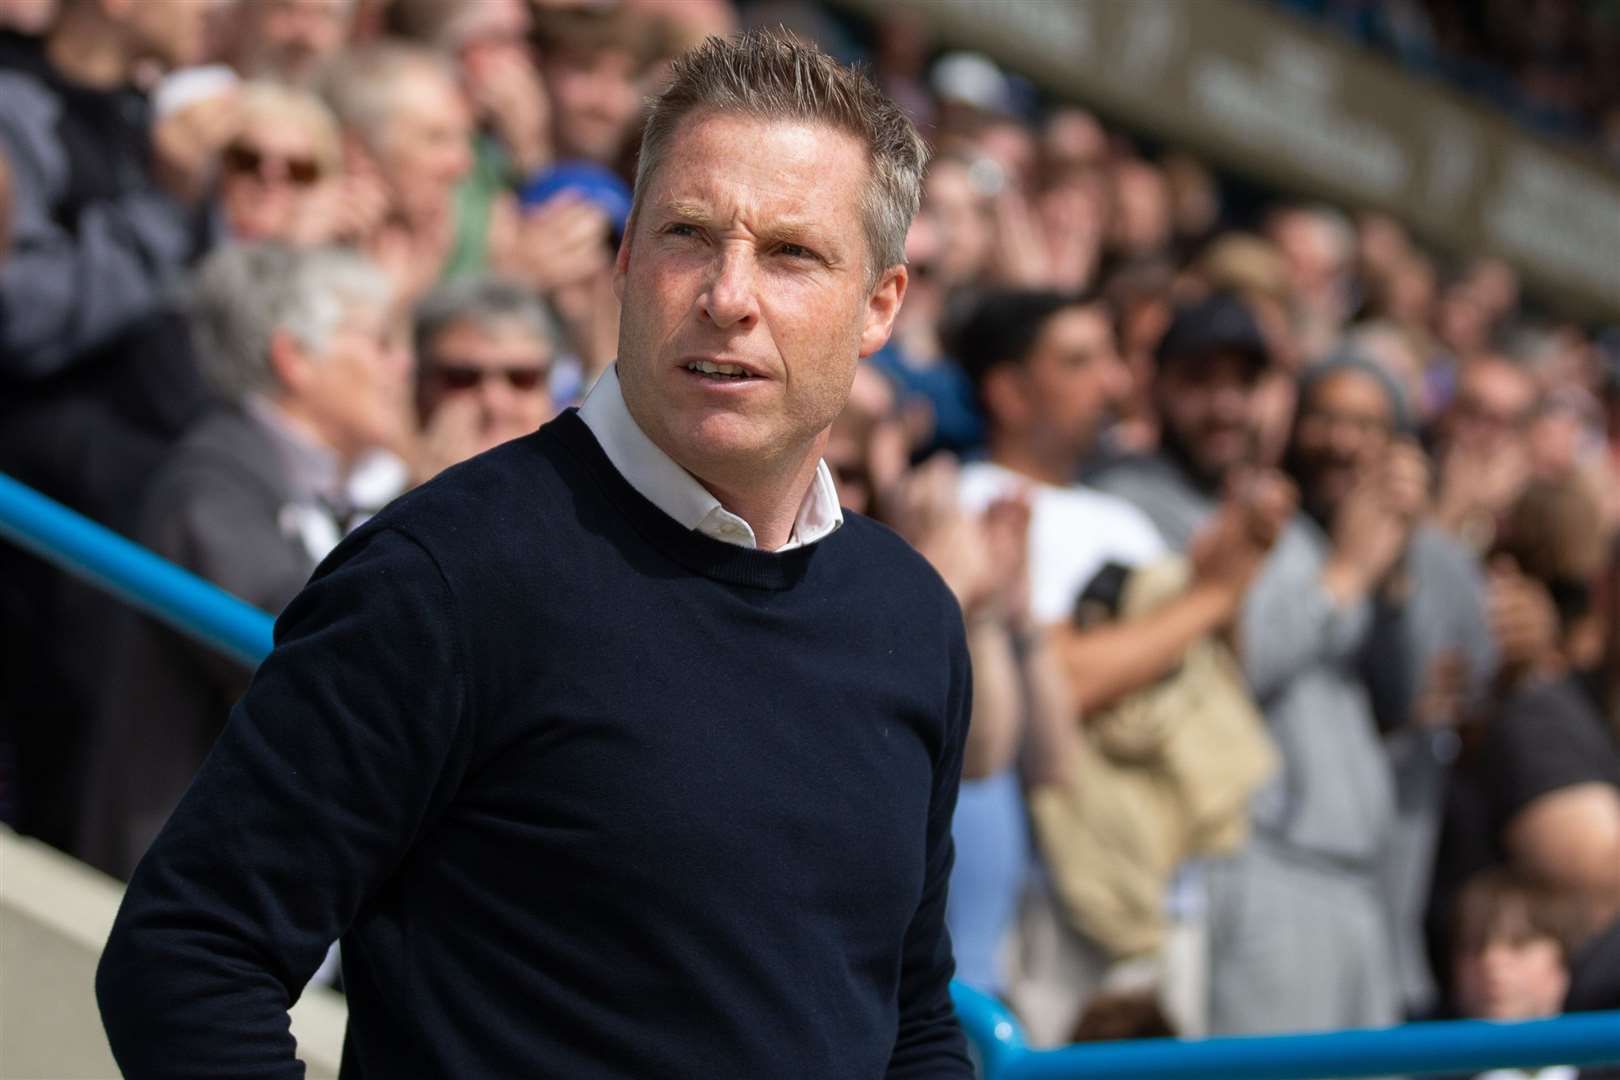 Gillingham should be clear of relegation worries but manager Neil Harris believes his side have plenty more to play for - and aren't quite safe yet